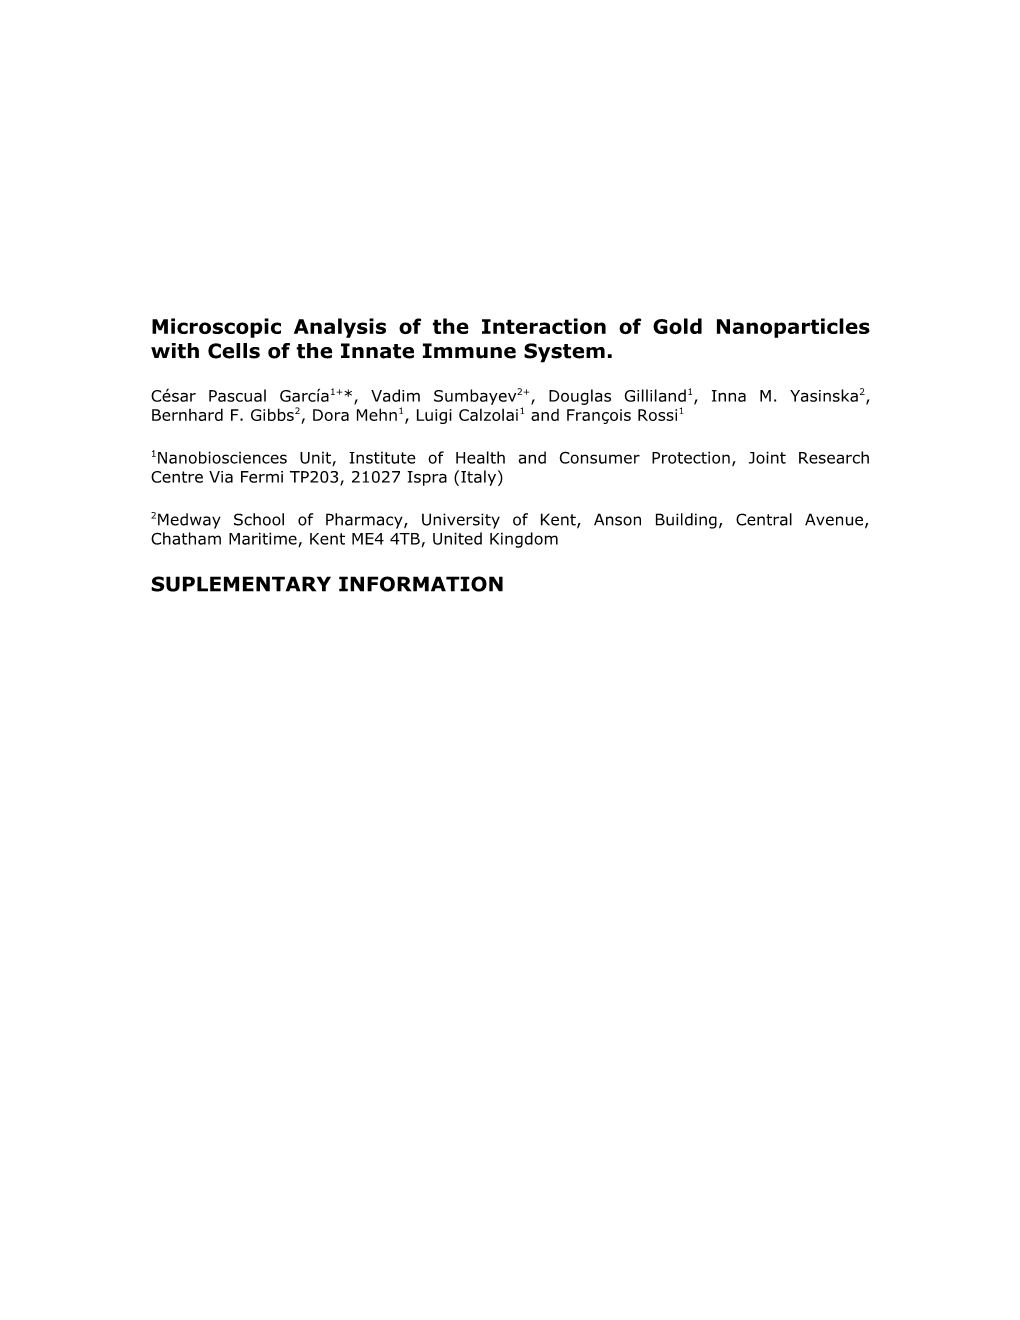 Microscopic Analysis of the Interaction of Gold Nanoparticles with Cells of the Innate